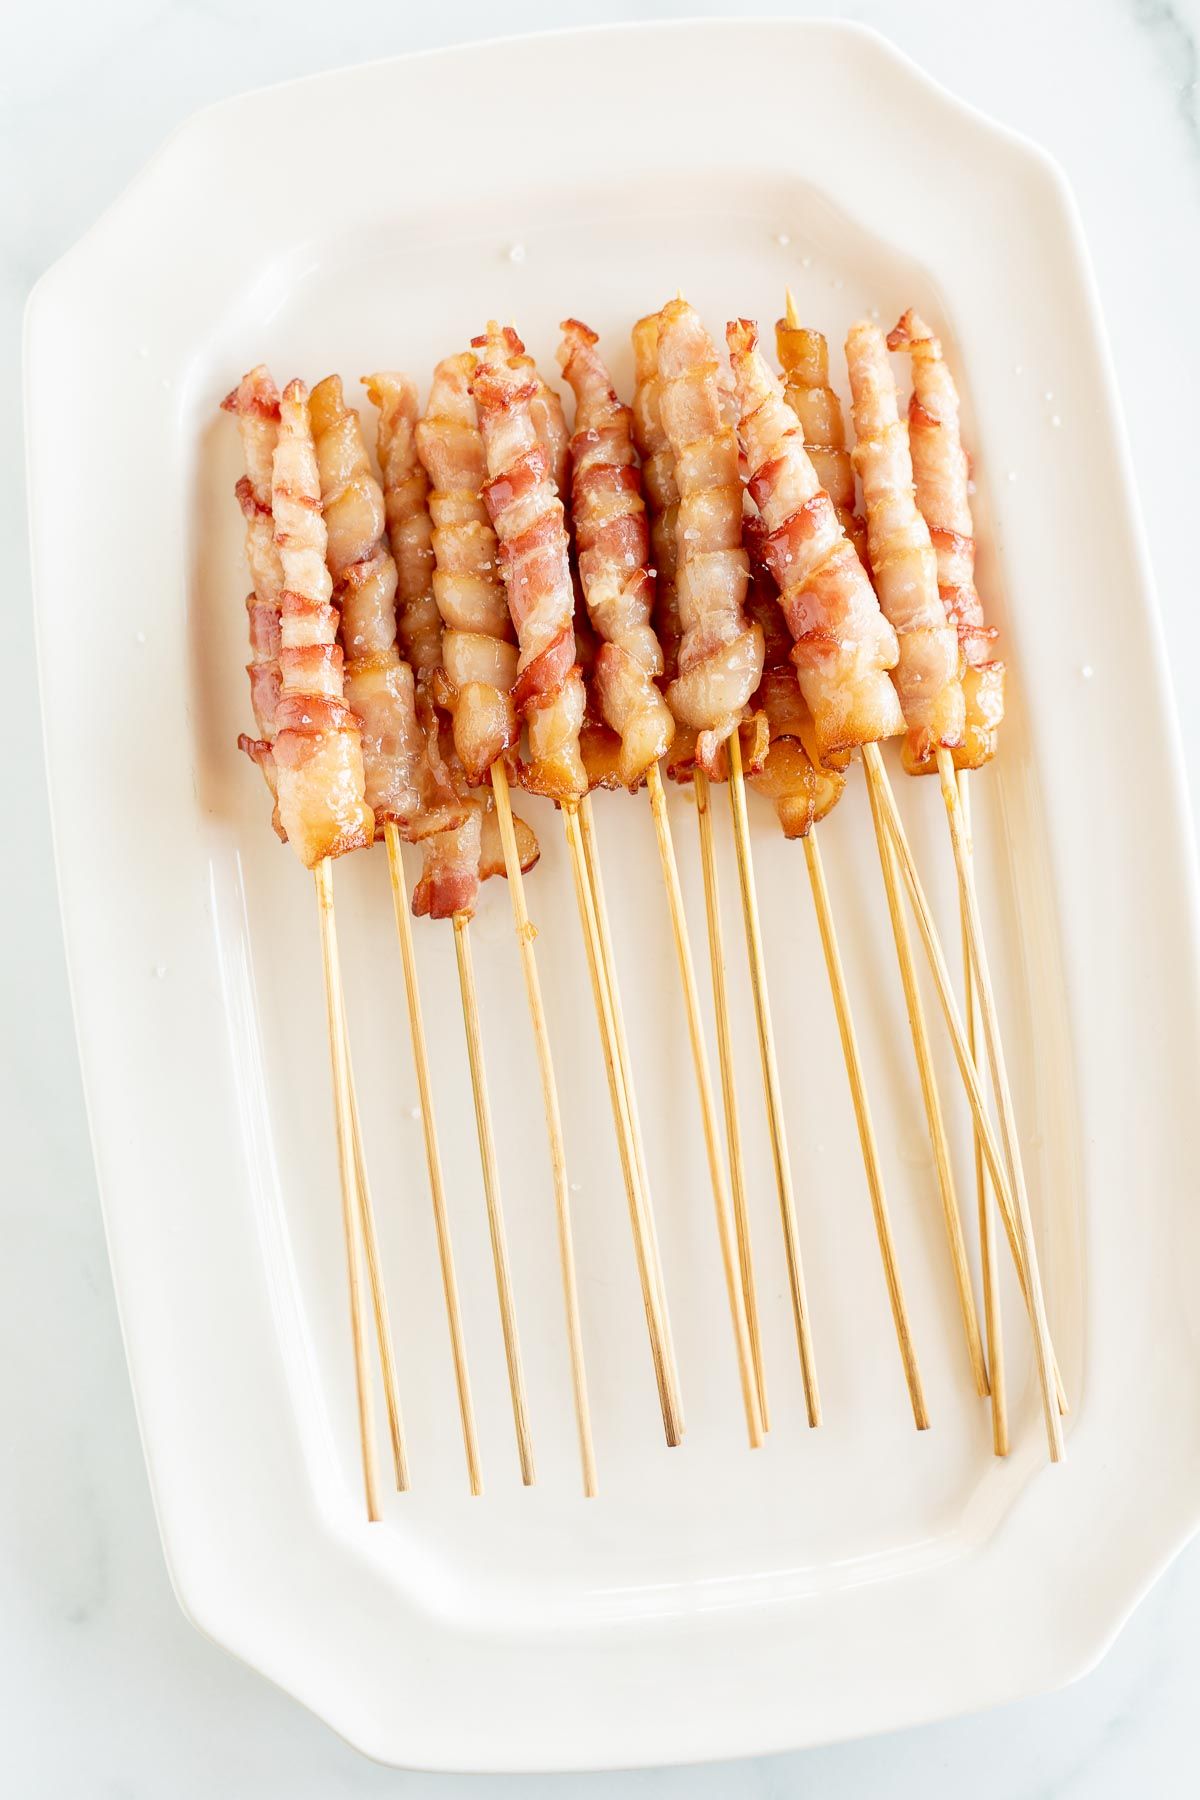 Caramelized bacon skewers on a white plate.